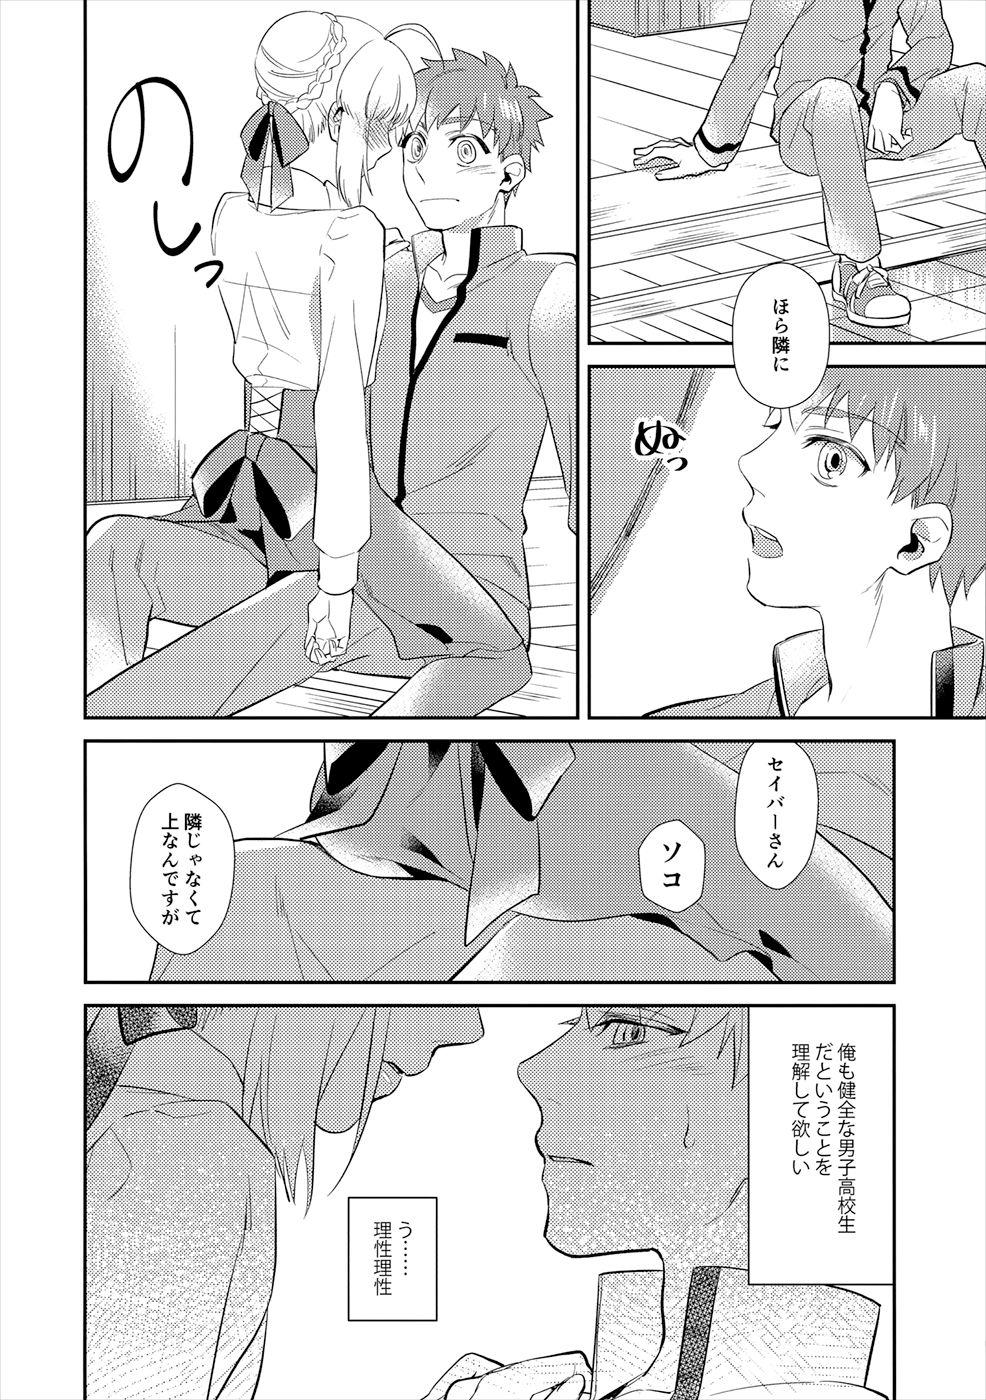 Hogtied Nonde Nomarete - Fate stay night Stepbro - Page 7